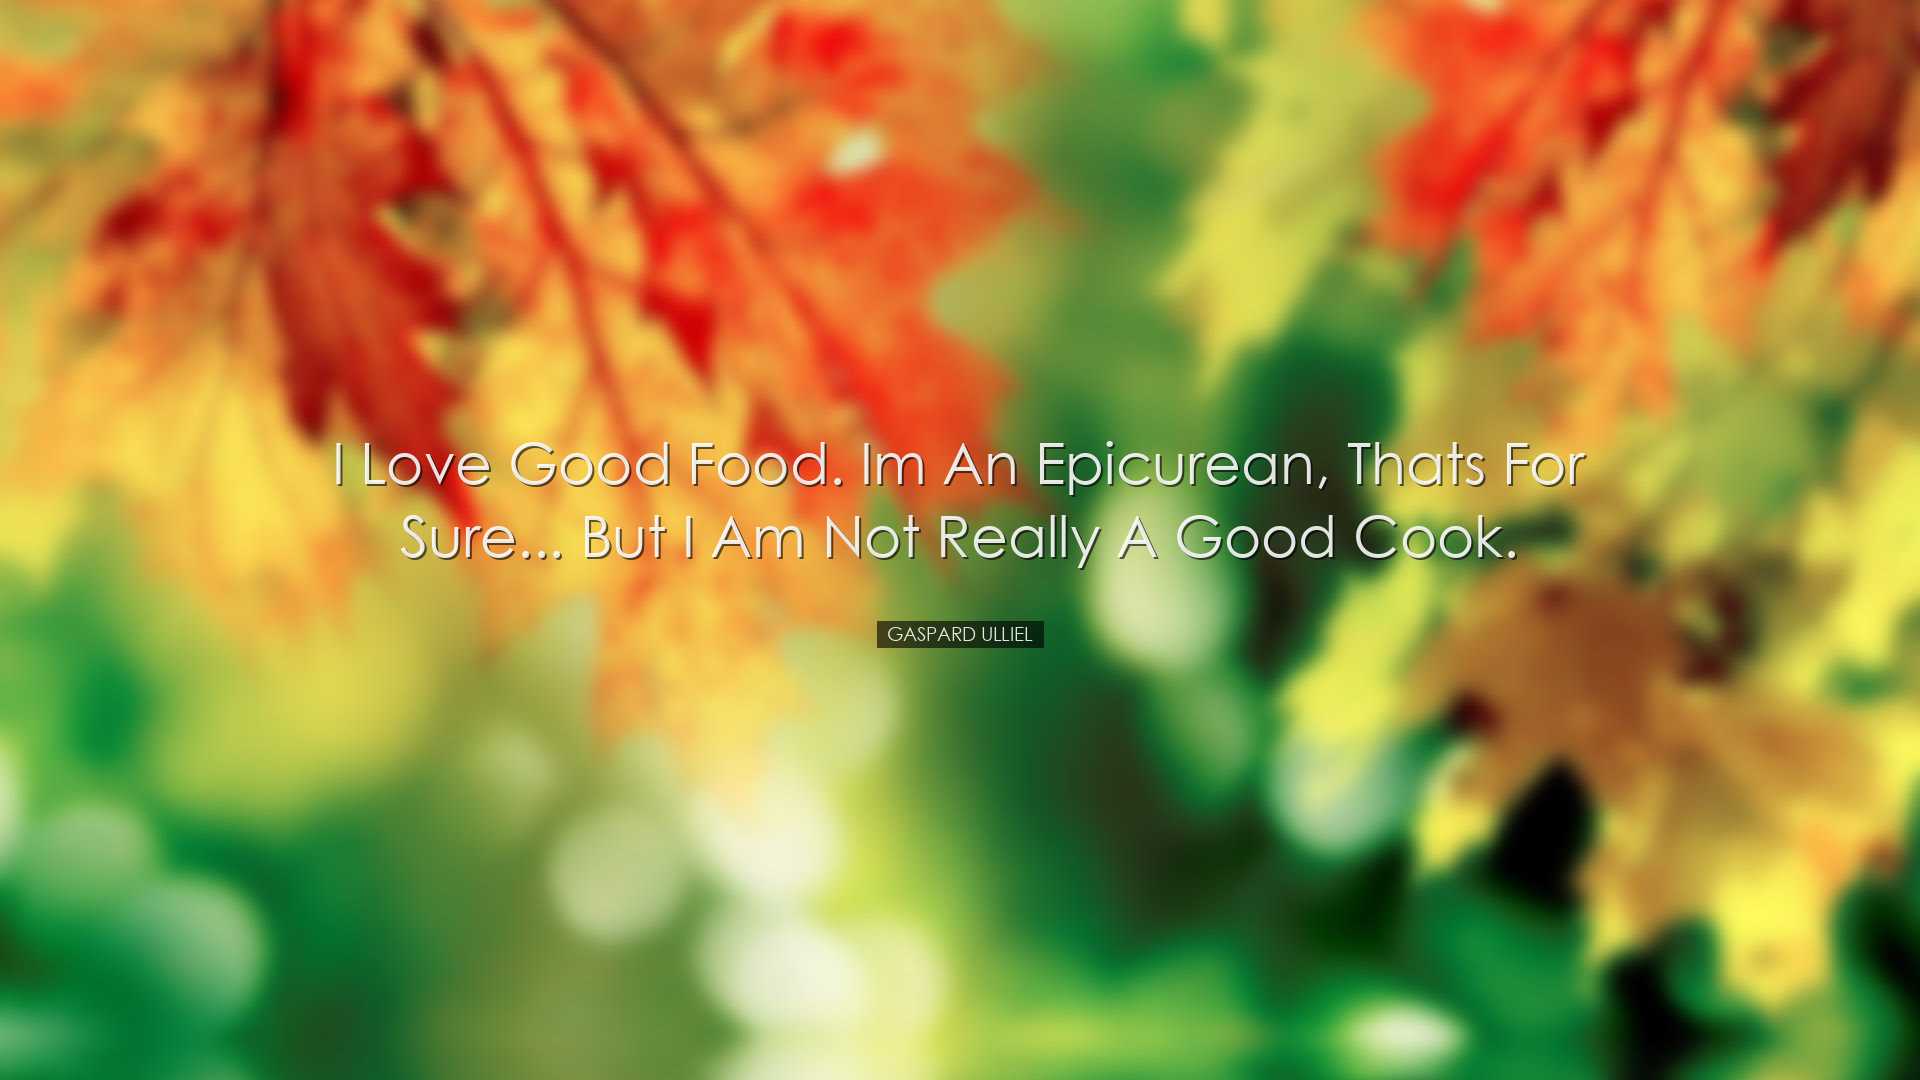 I love good food. Im an epicurean, thats for sure... But I am not